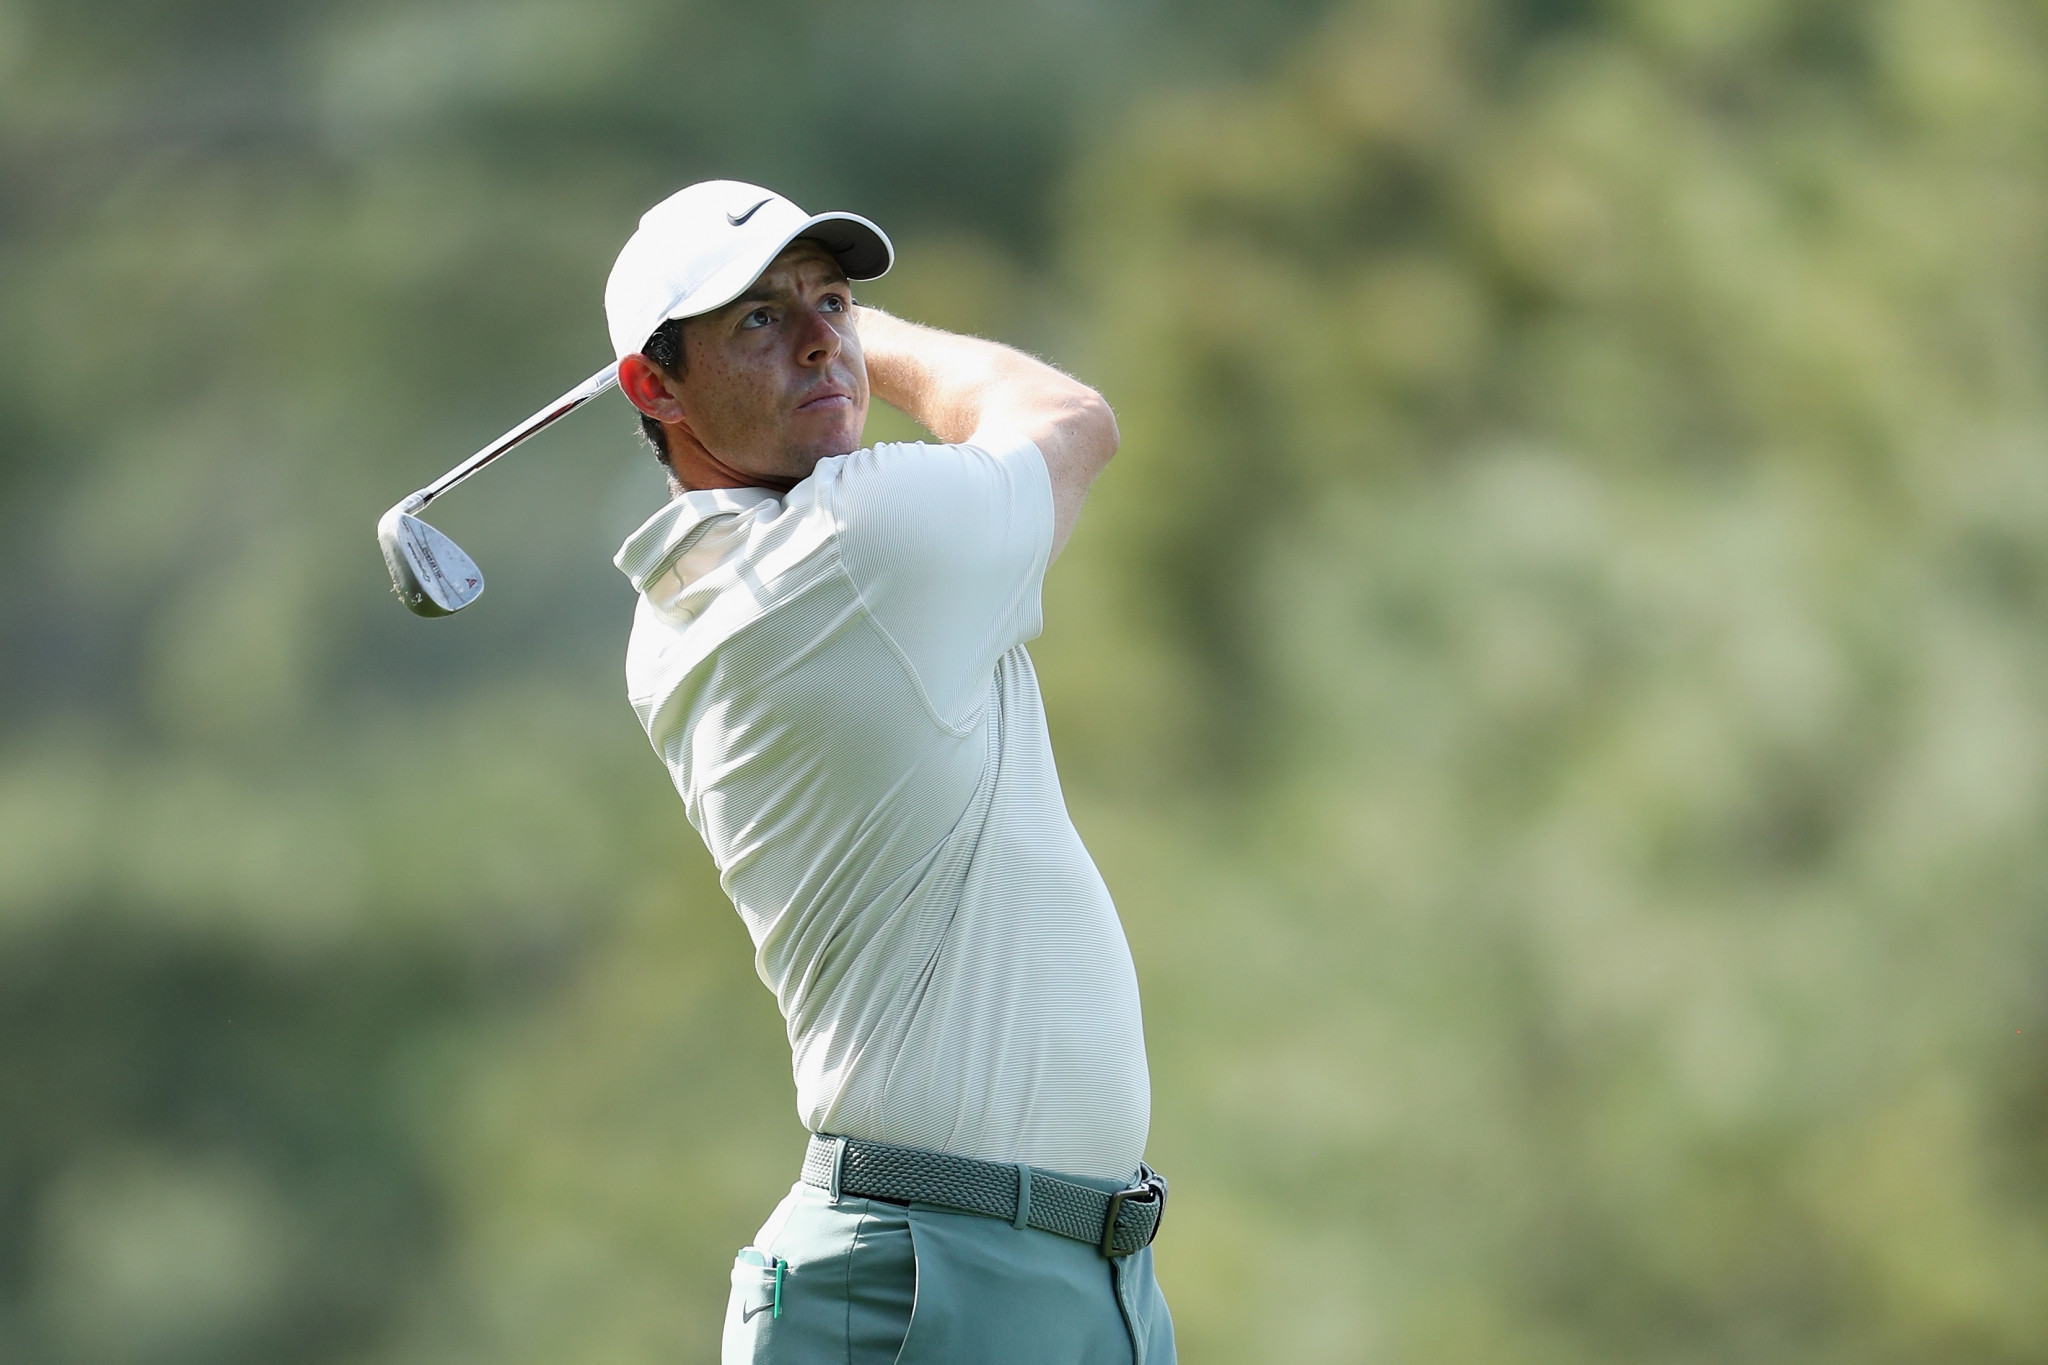 The Masters is the only major Northern Ireland's Rory McIlroy has failed to win ©Getty Images